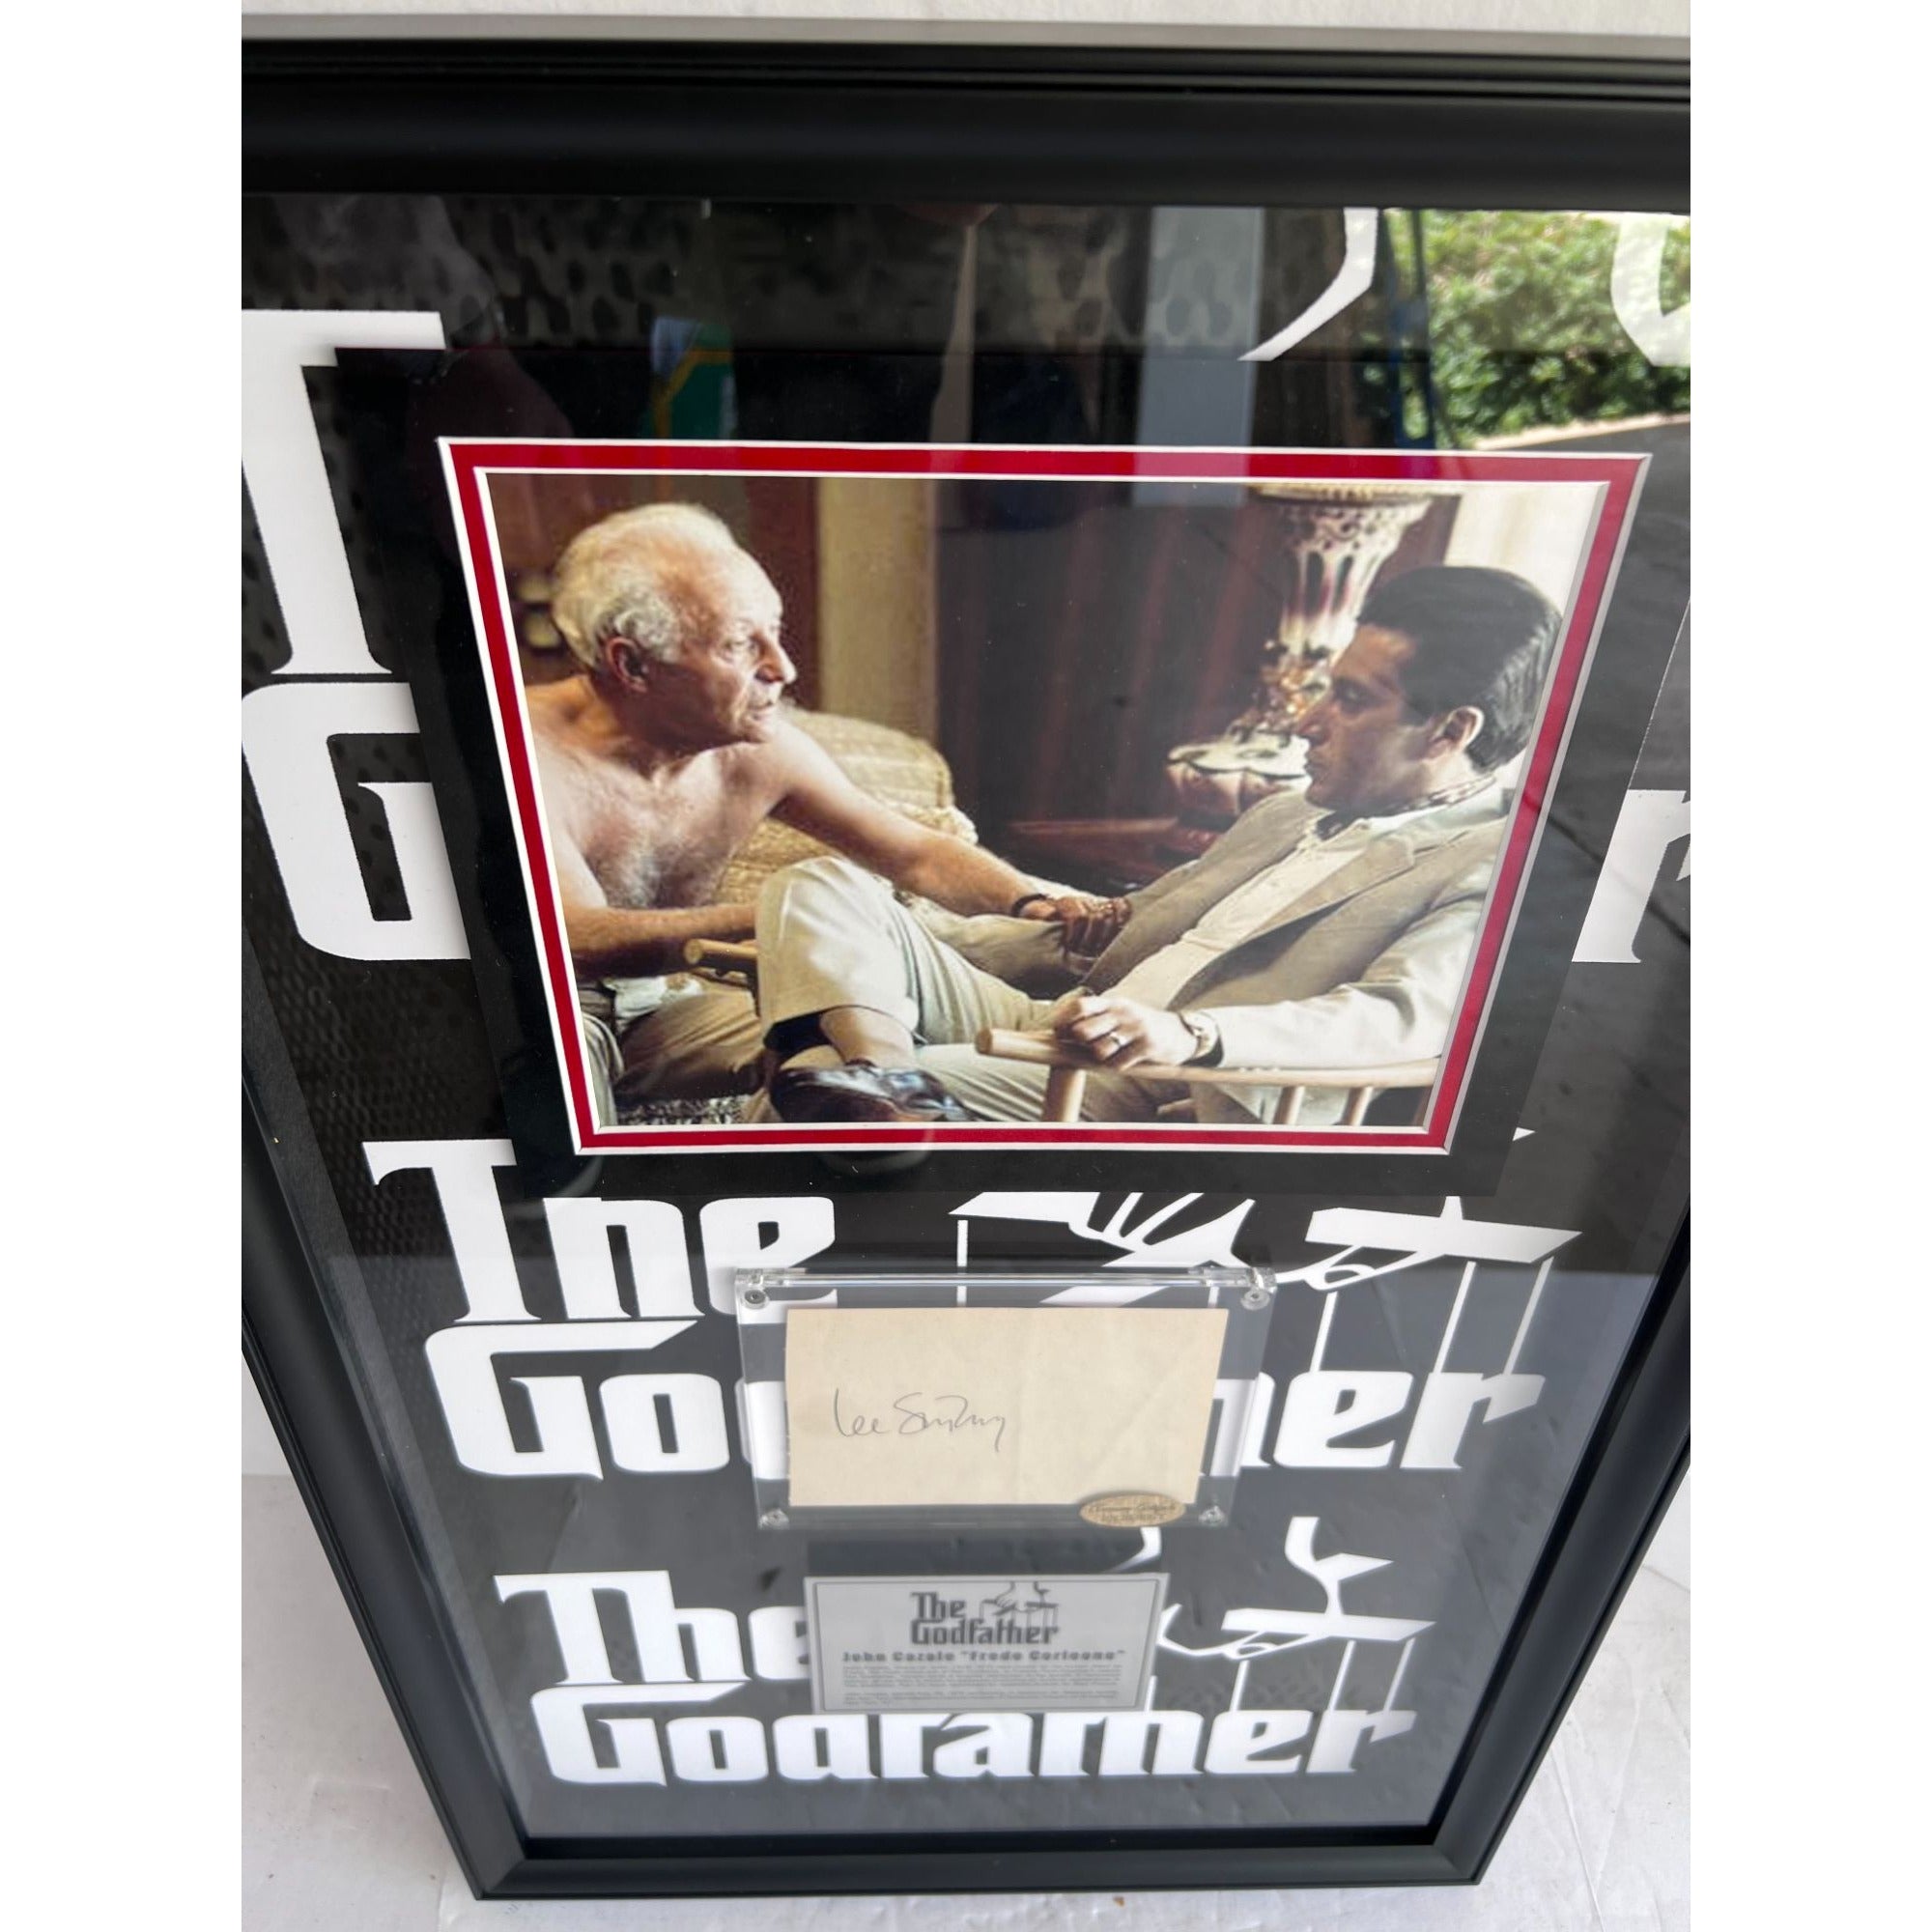 Lee Strasberg "Hyman Roth Godfather Part II" autograph book page signed and framed (17x28)